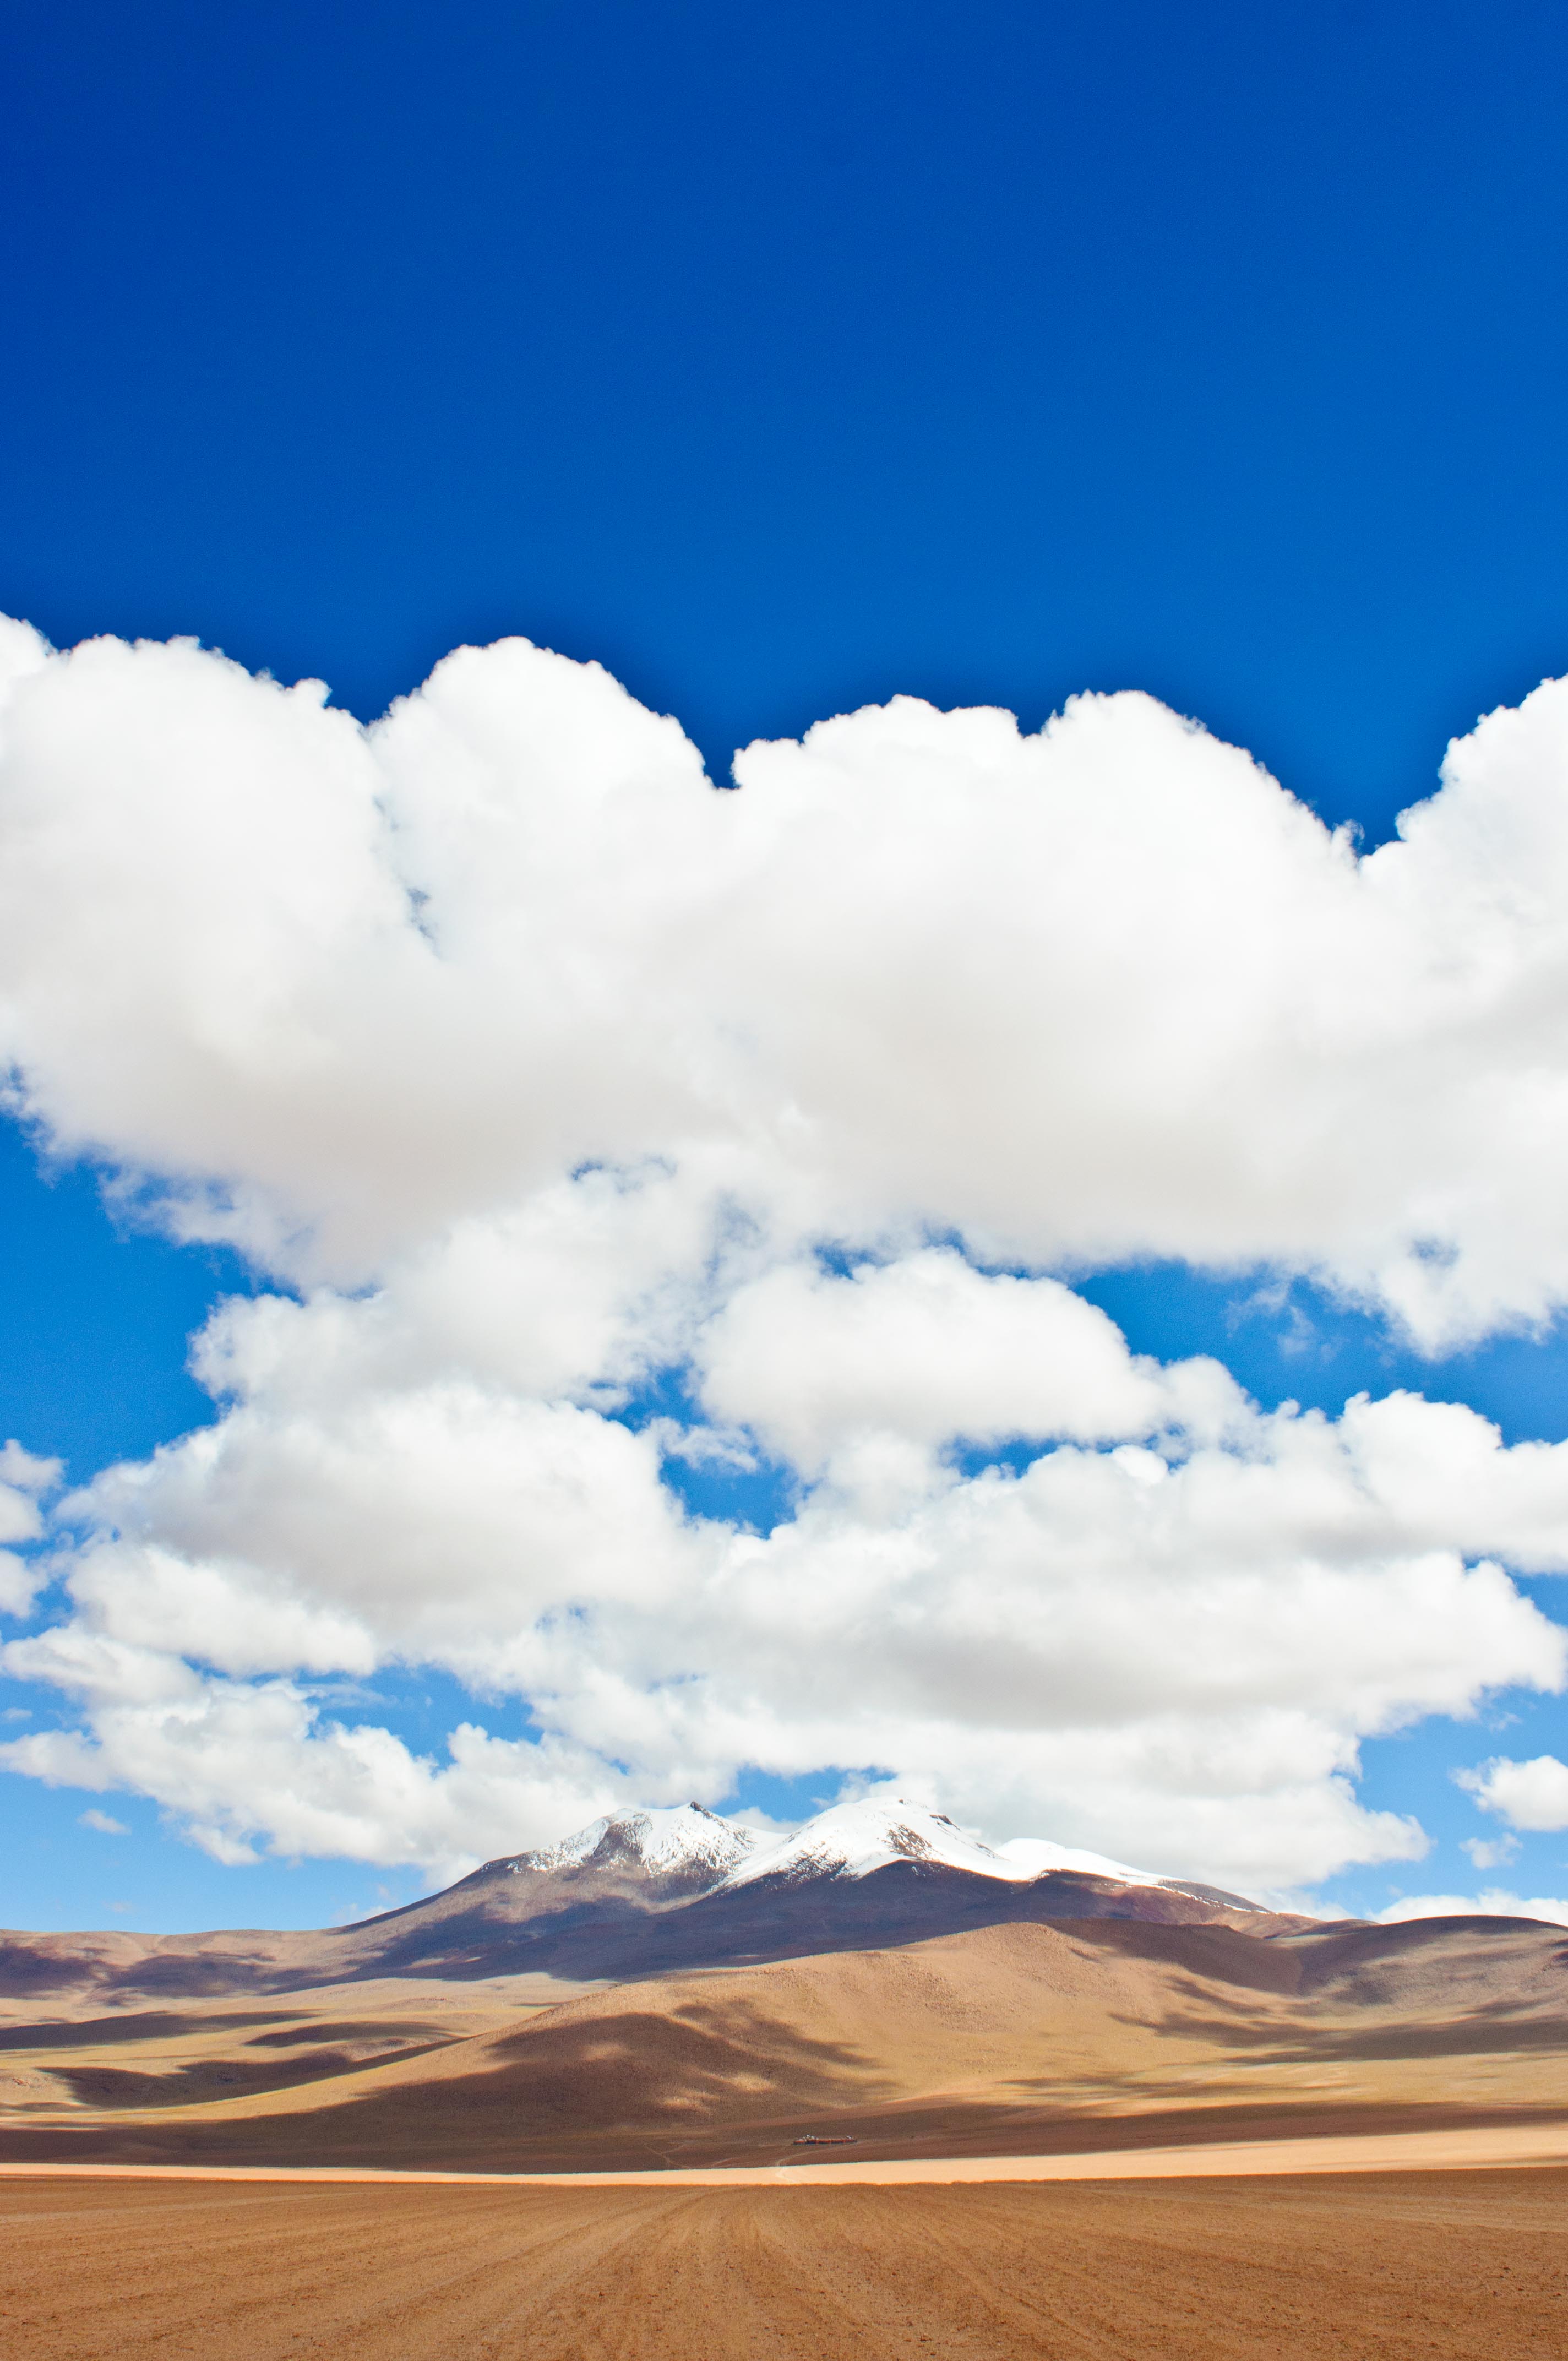 The Andean plateau is a contrast of brown deserts, snow-capped peaks and the bluest of skies.